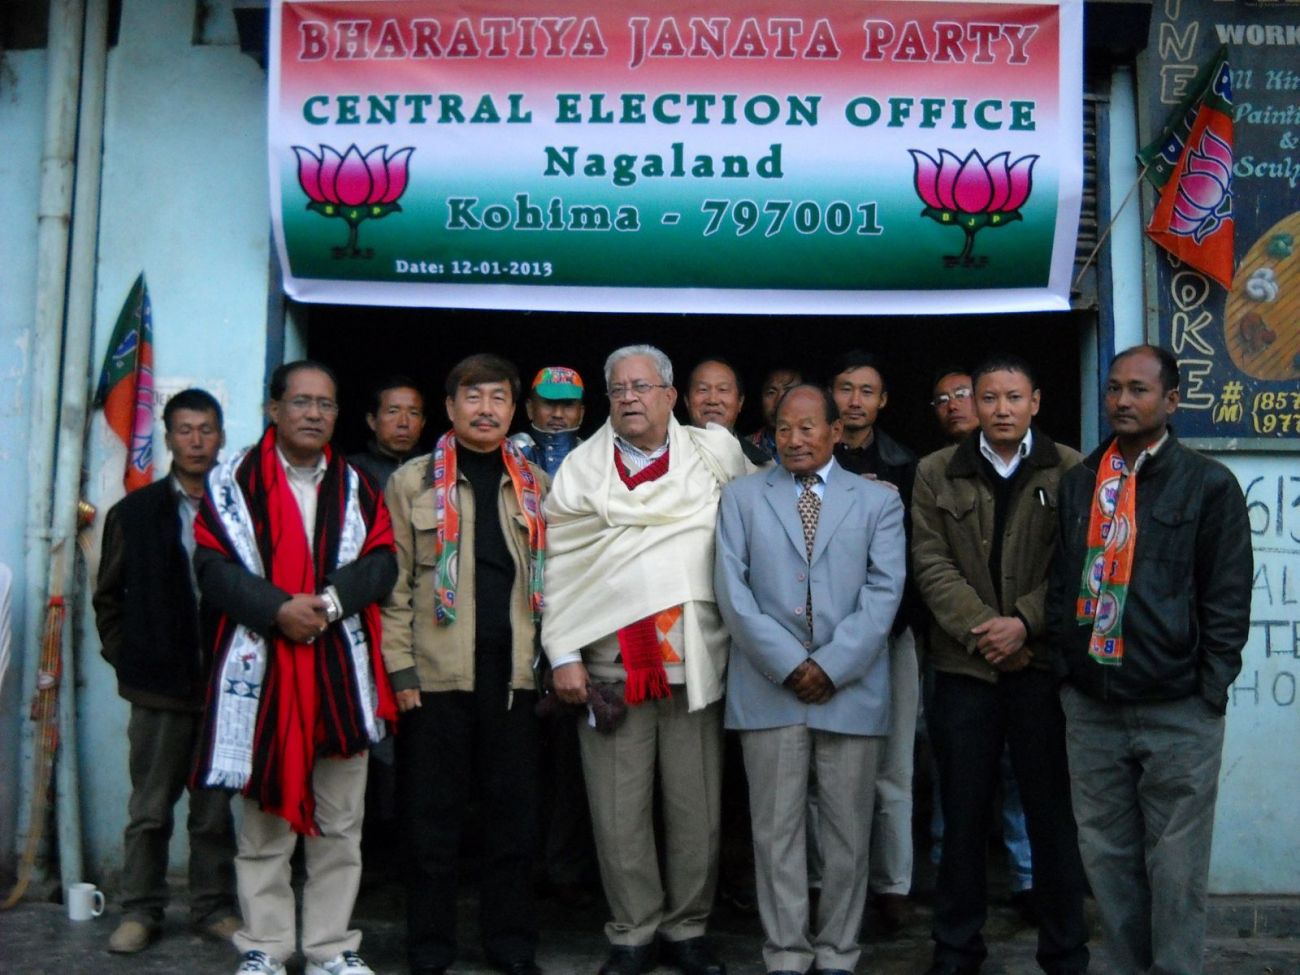 PB Acharya front (3rd left front), Election in-charge of Nagaland and Meghalaya. Former AP MP Tapir Gao (2nd left front), BJP National Secretary, M Chuba Ao (1st left front), State BJP President are also seen in the picture. NEPS Photo